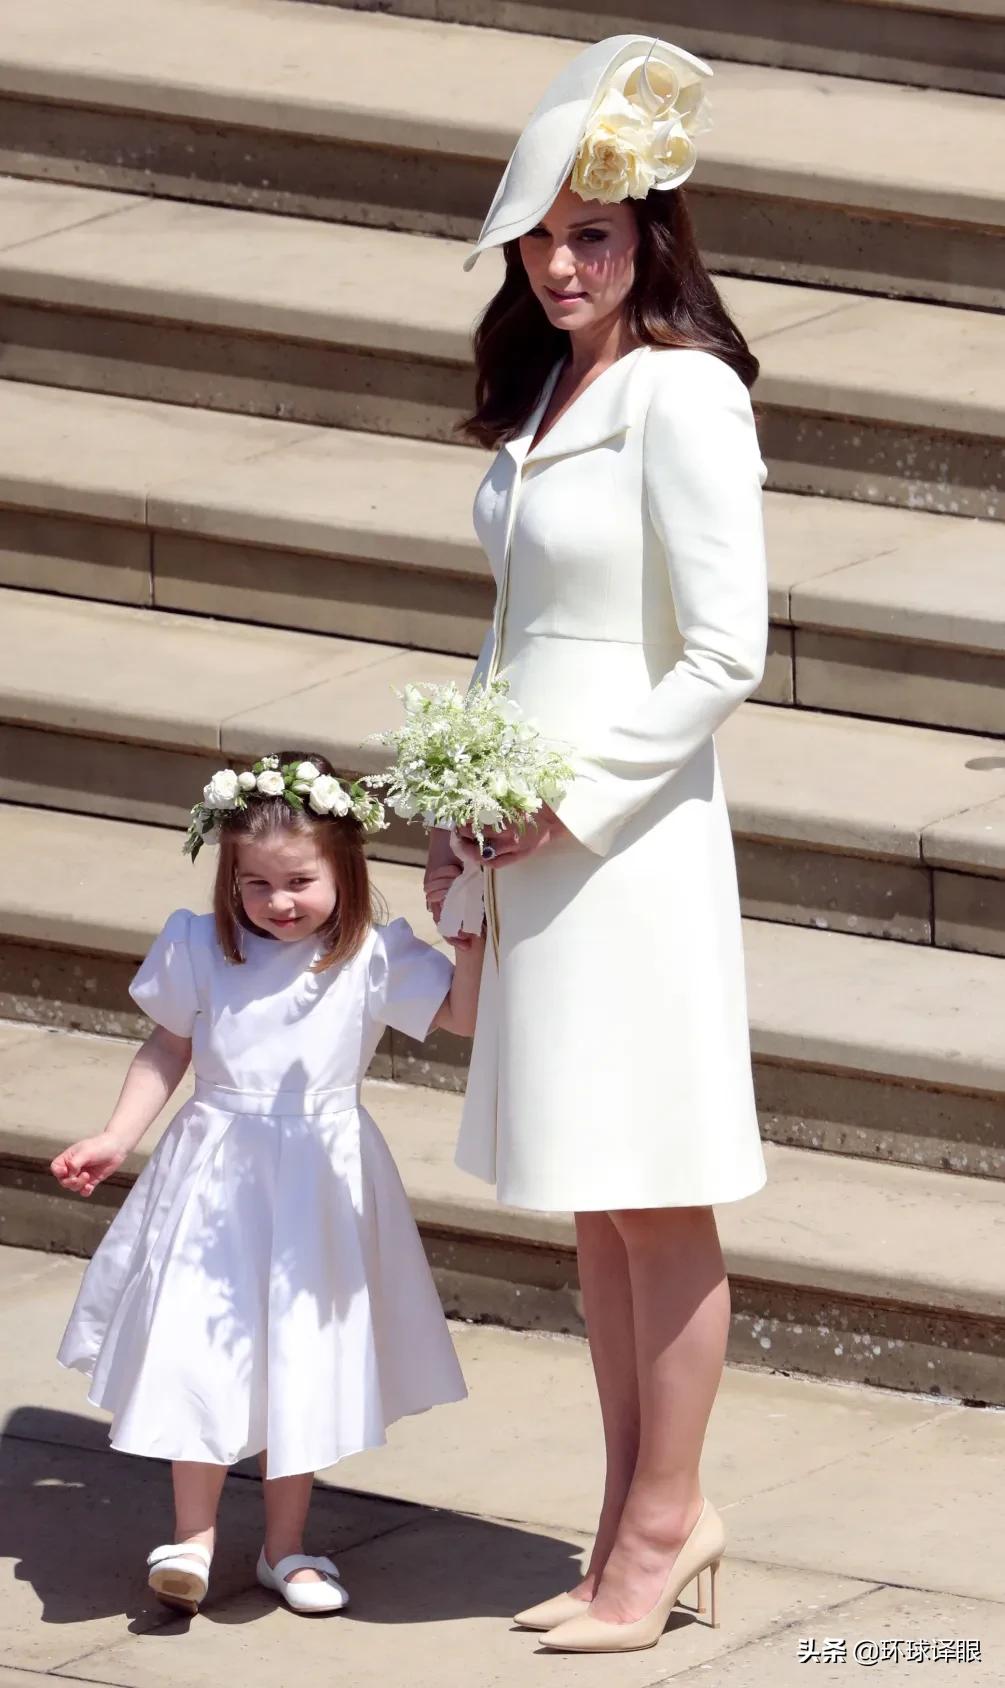 After the flower girl dress incident was exposed, Megan presented Kate ...